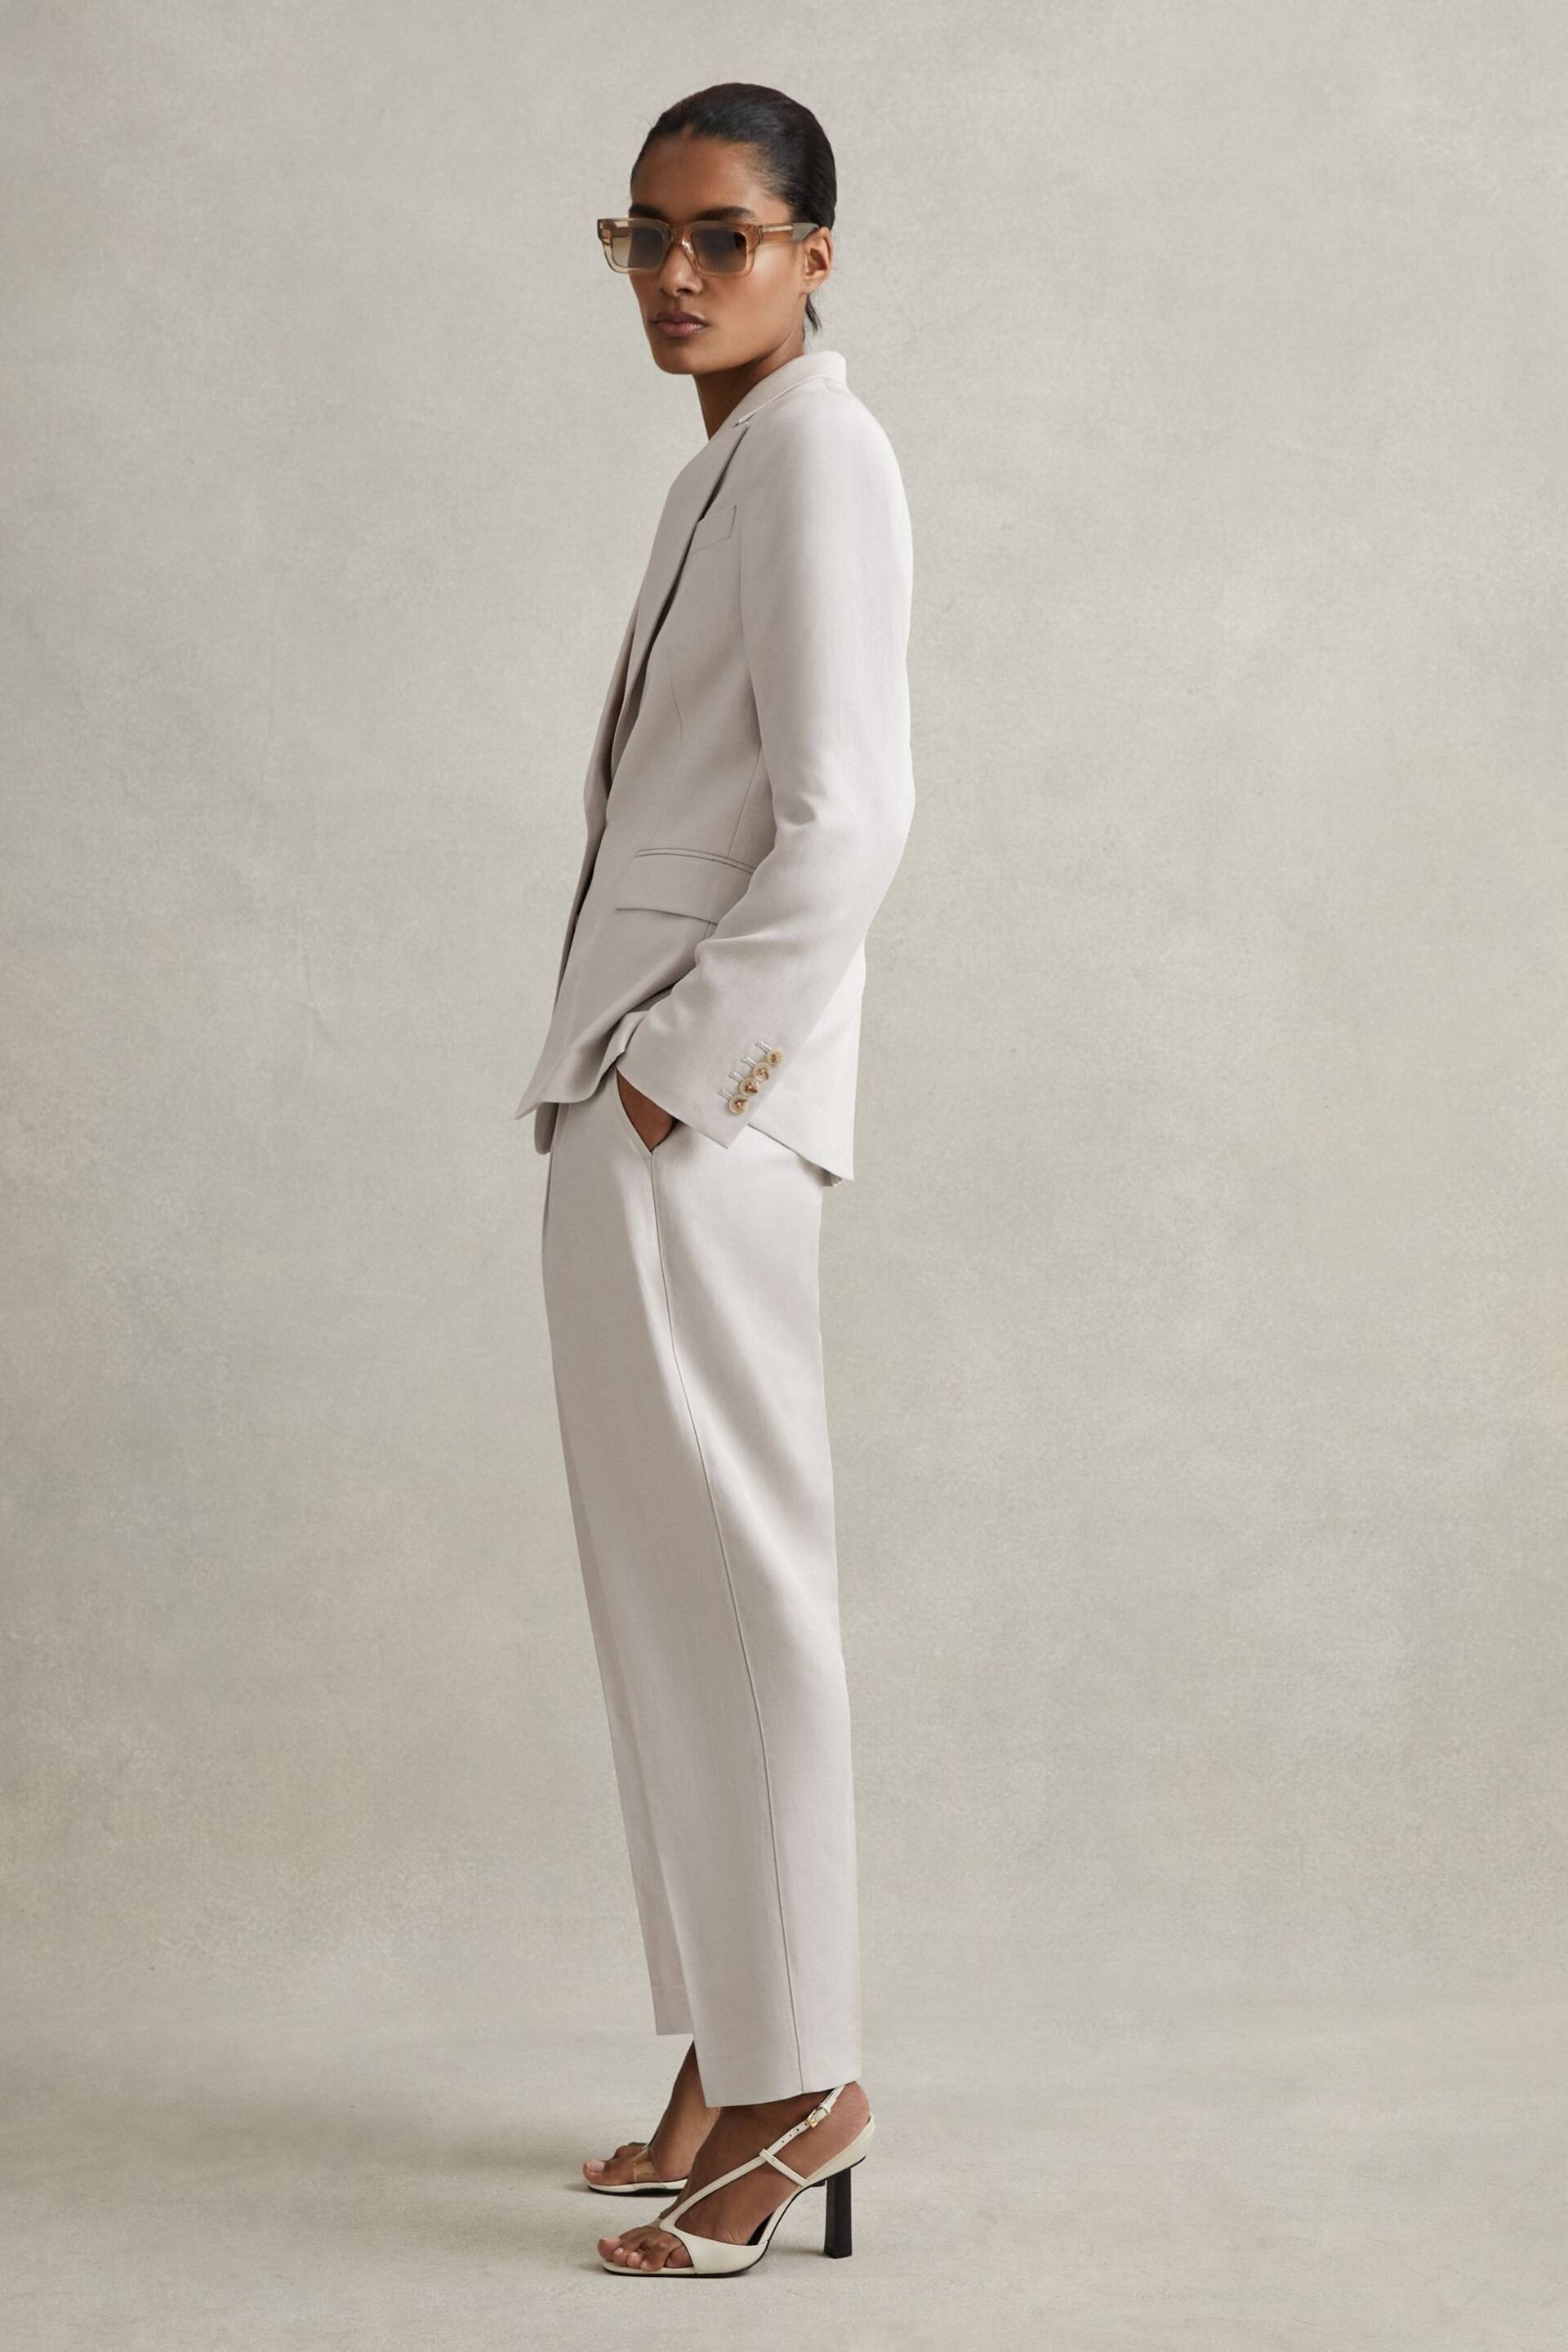 Reiss Light Grey Farrah Tapered Suit Trousers with TENCEL™ Fibers - Image 5 of 6